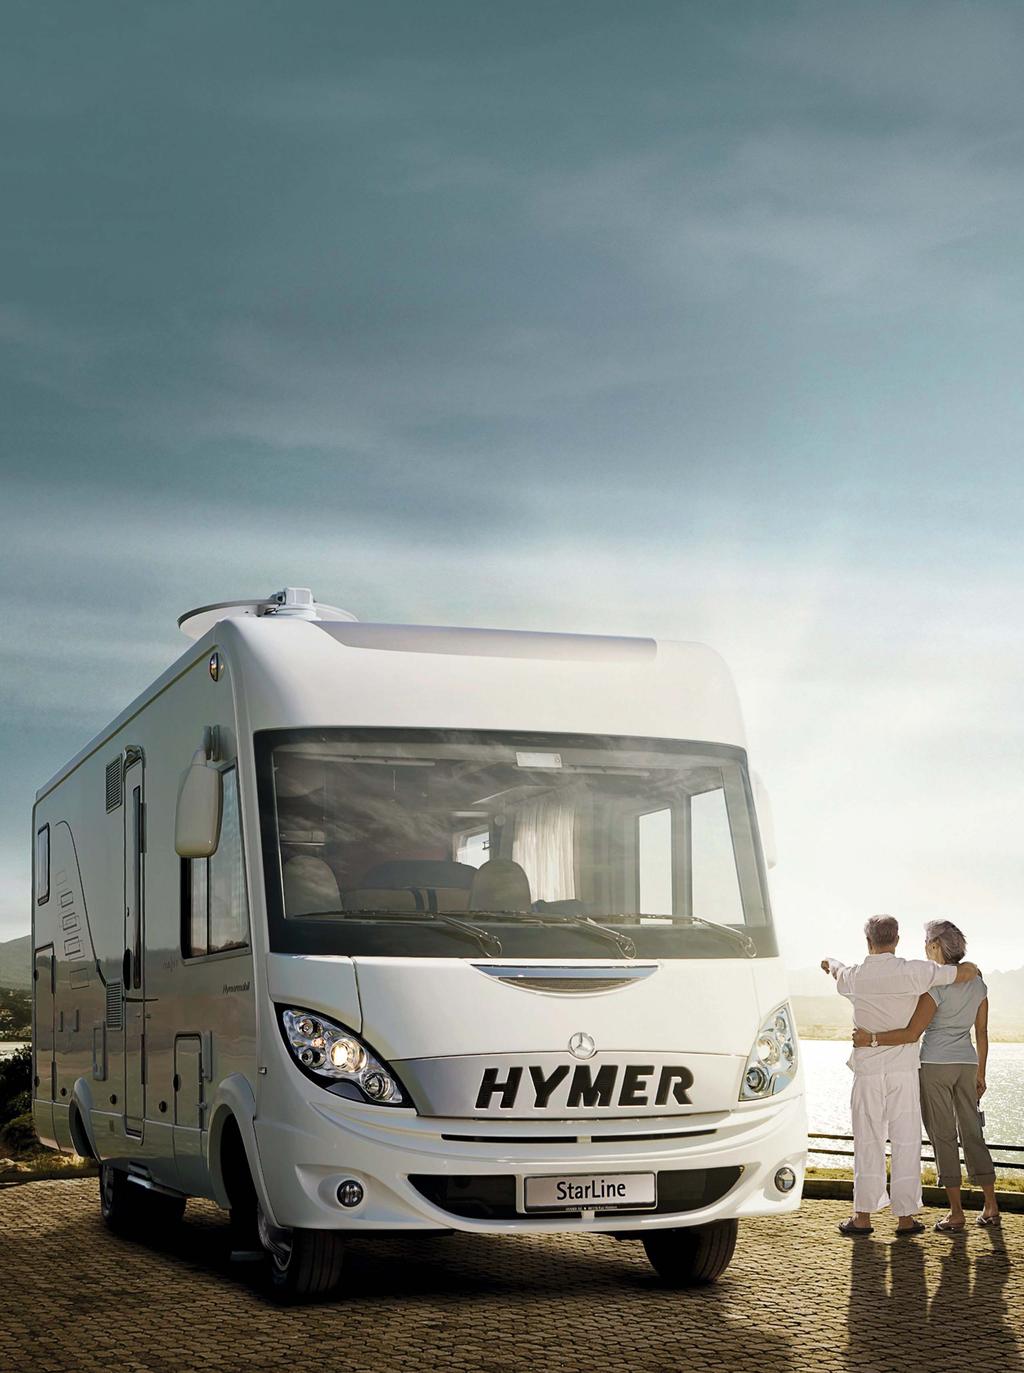 Especially frugal, particularly good value retention More value for everyone. A motorhome is a long term investment.